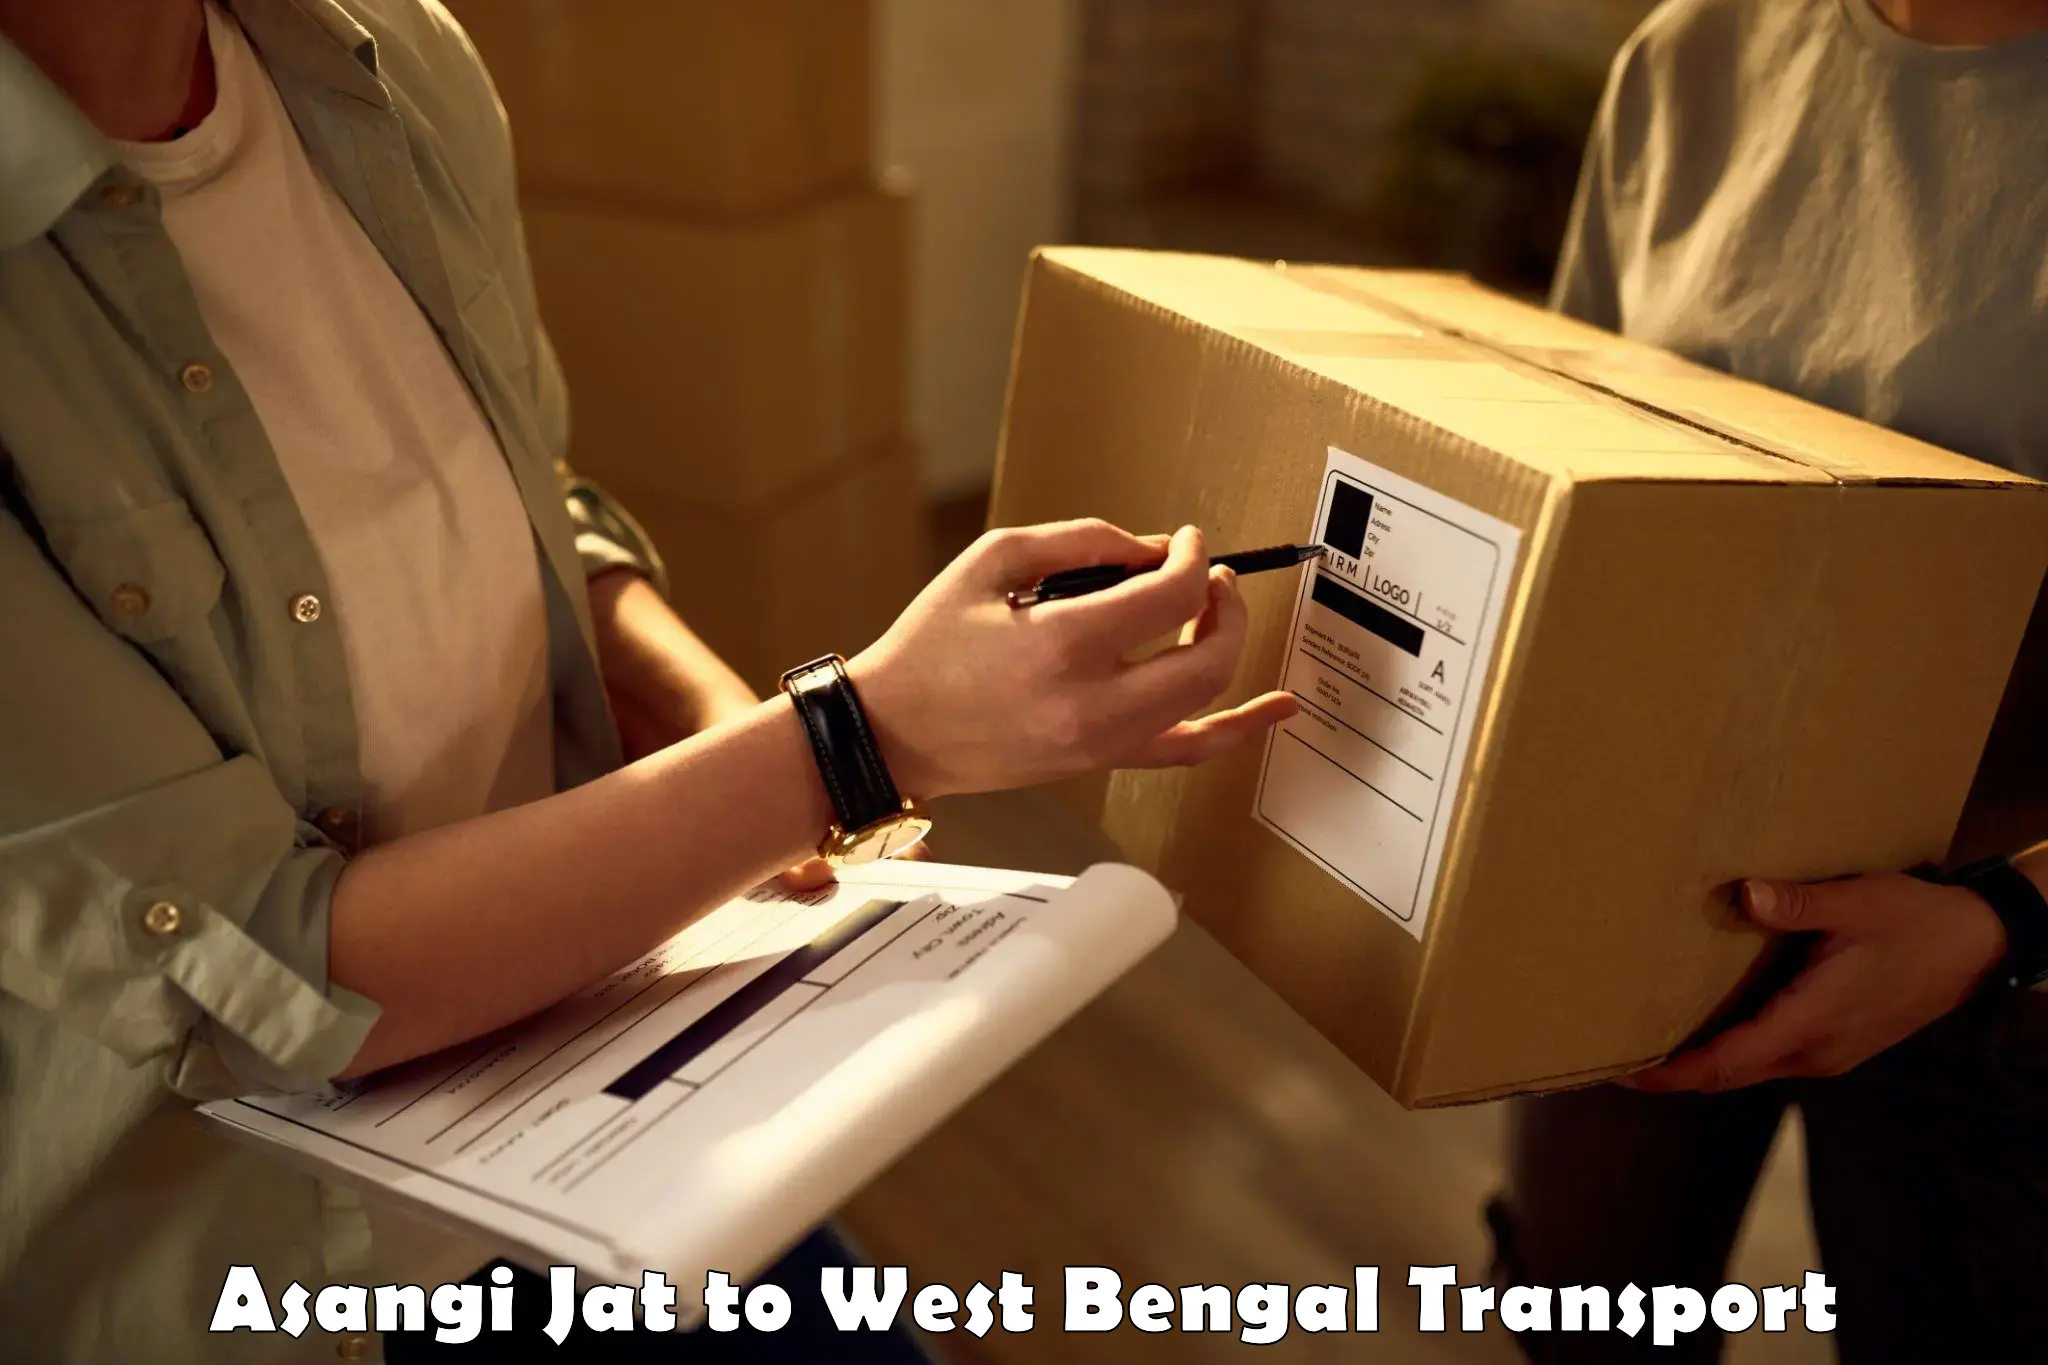 Package delivery services Asangi Jat to Barrackpore